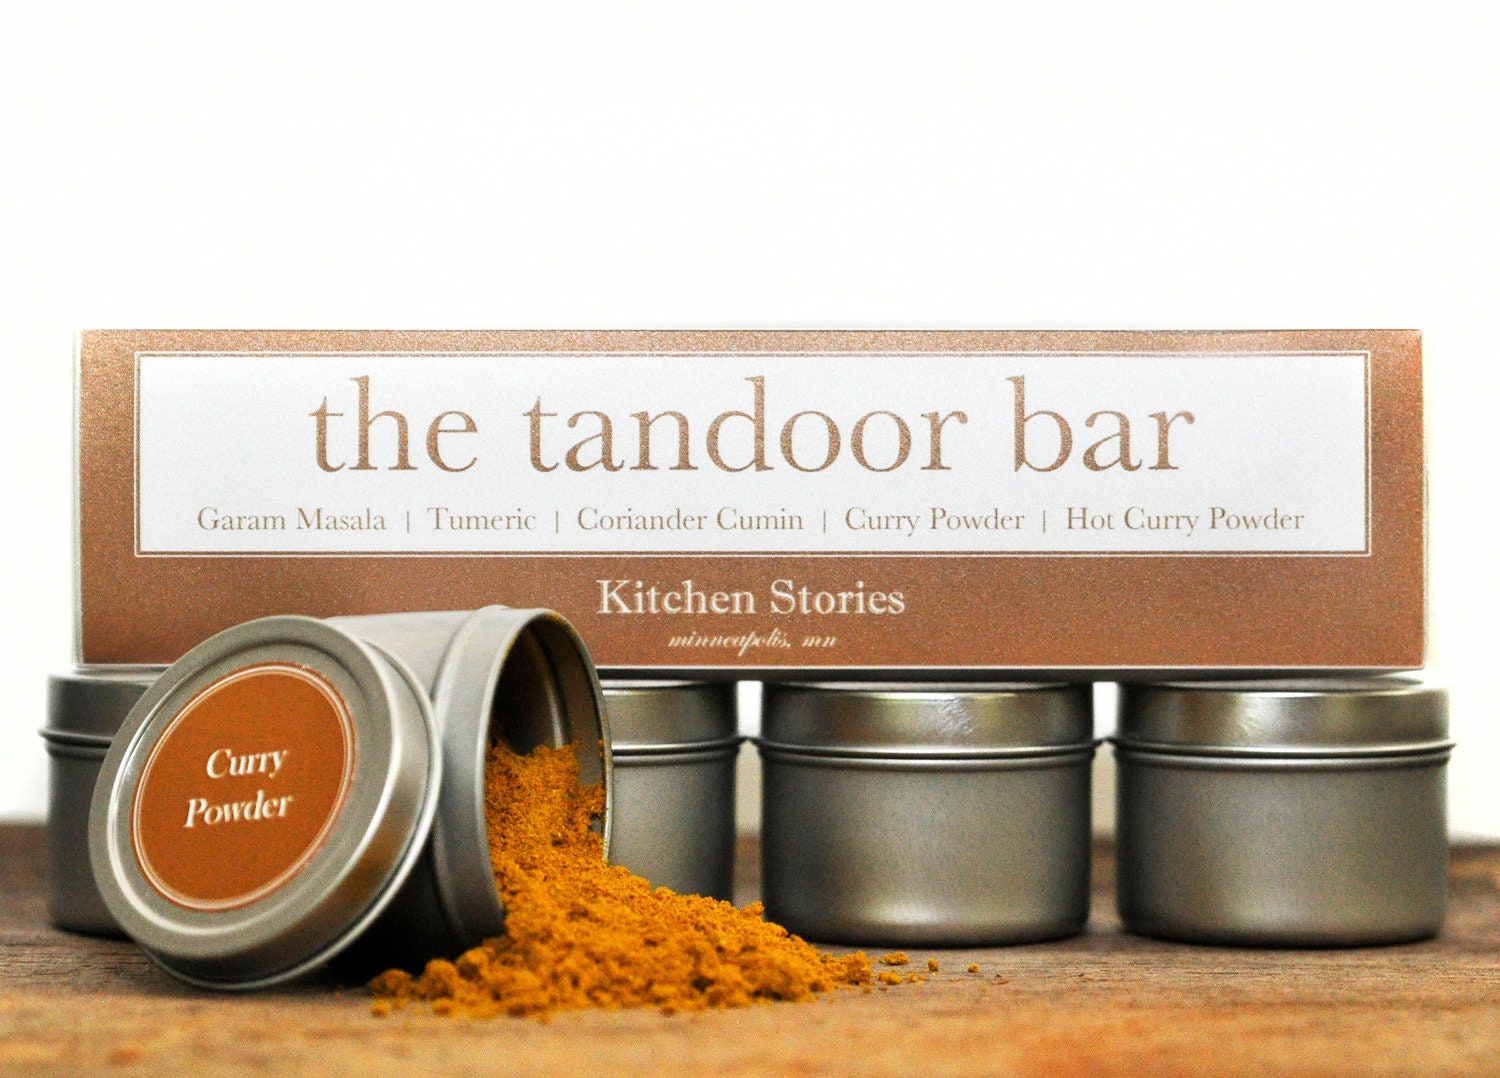 The Taste of India: The Tandoor Bar Indian Spice Kit. 5 great spices and blends to take you on a trip through India.